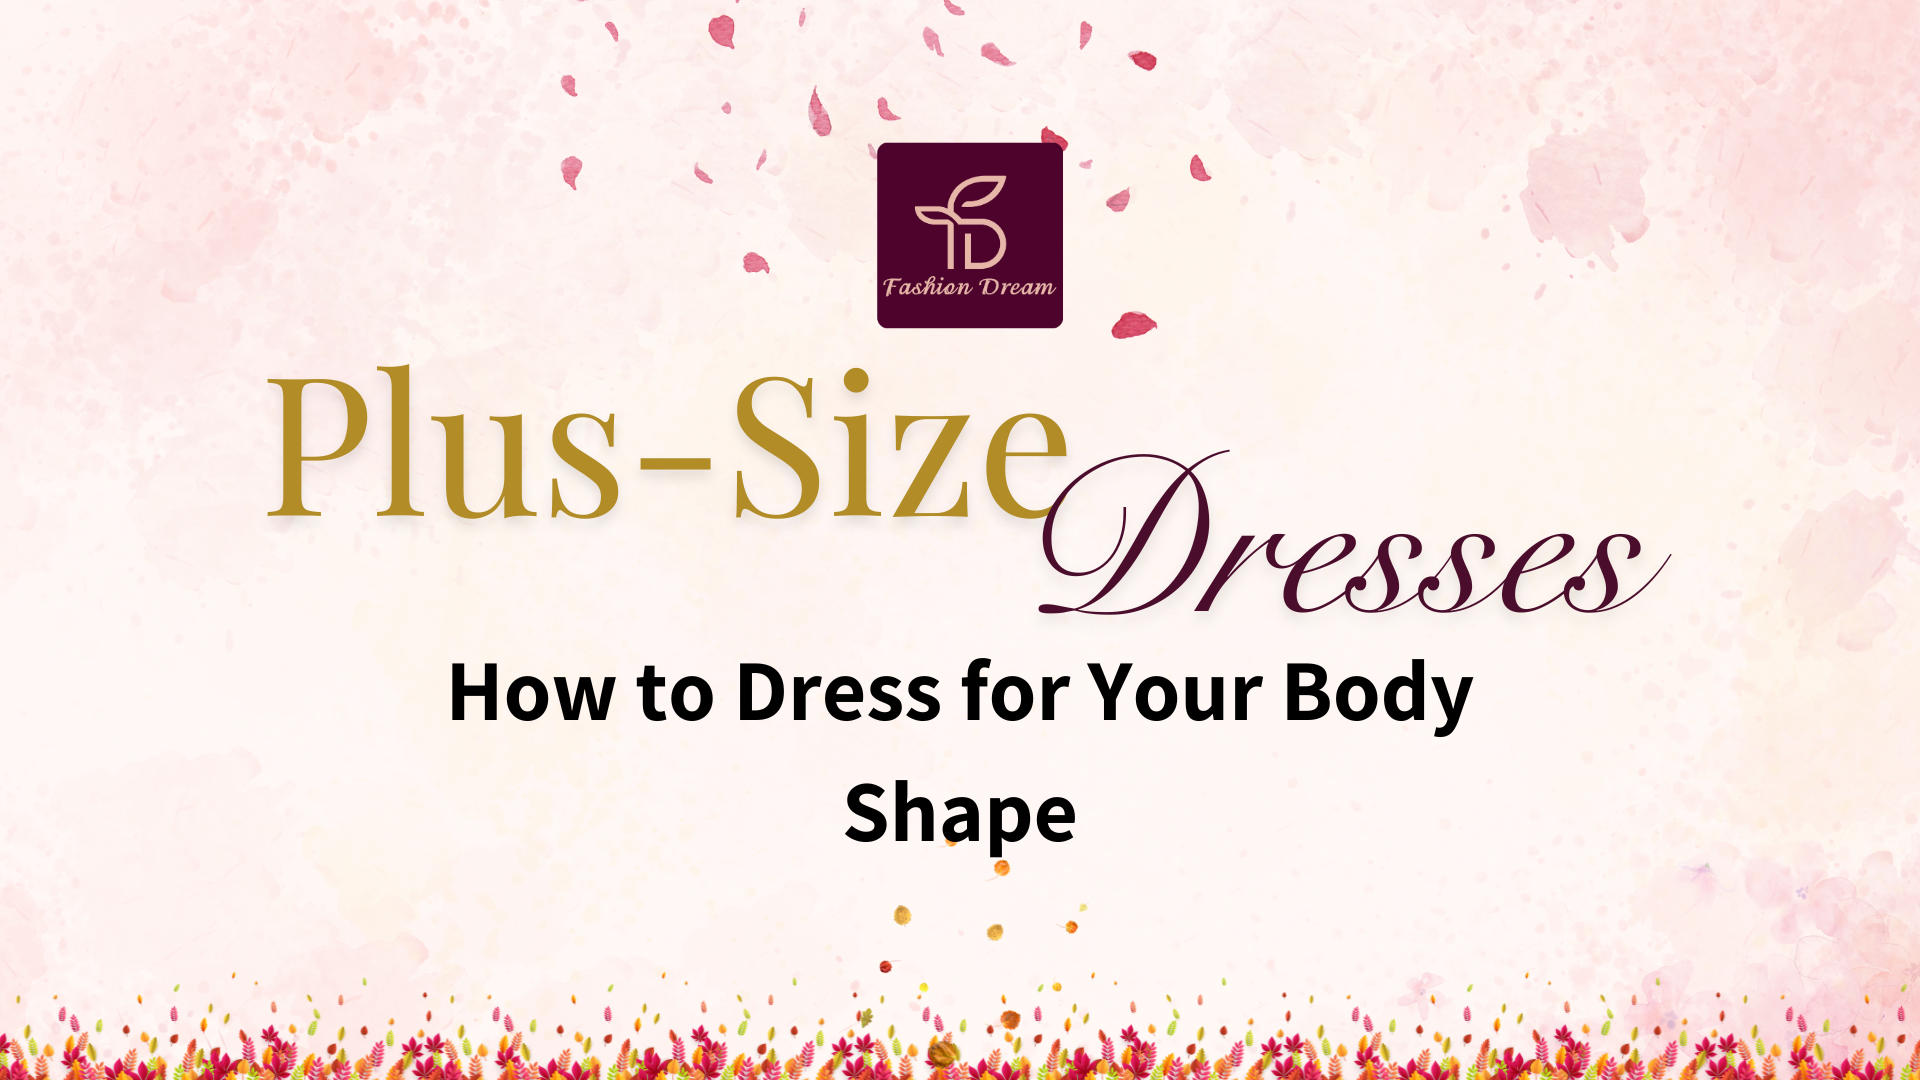 How to Dress for Your Body Shape: Plus Size Edition